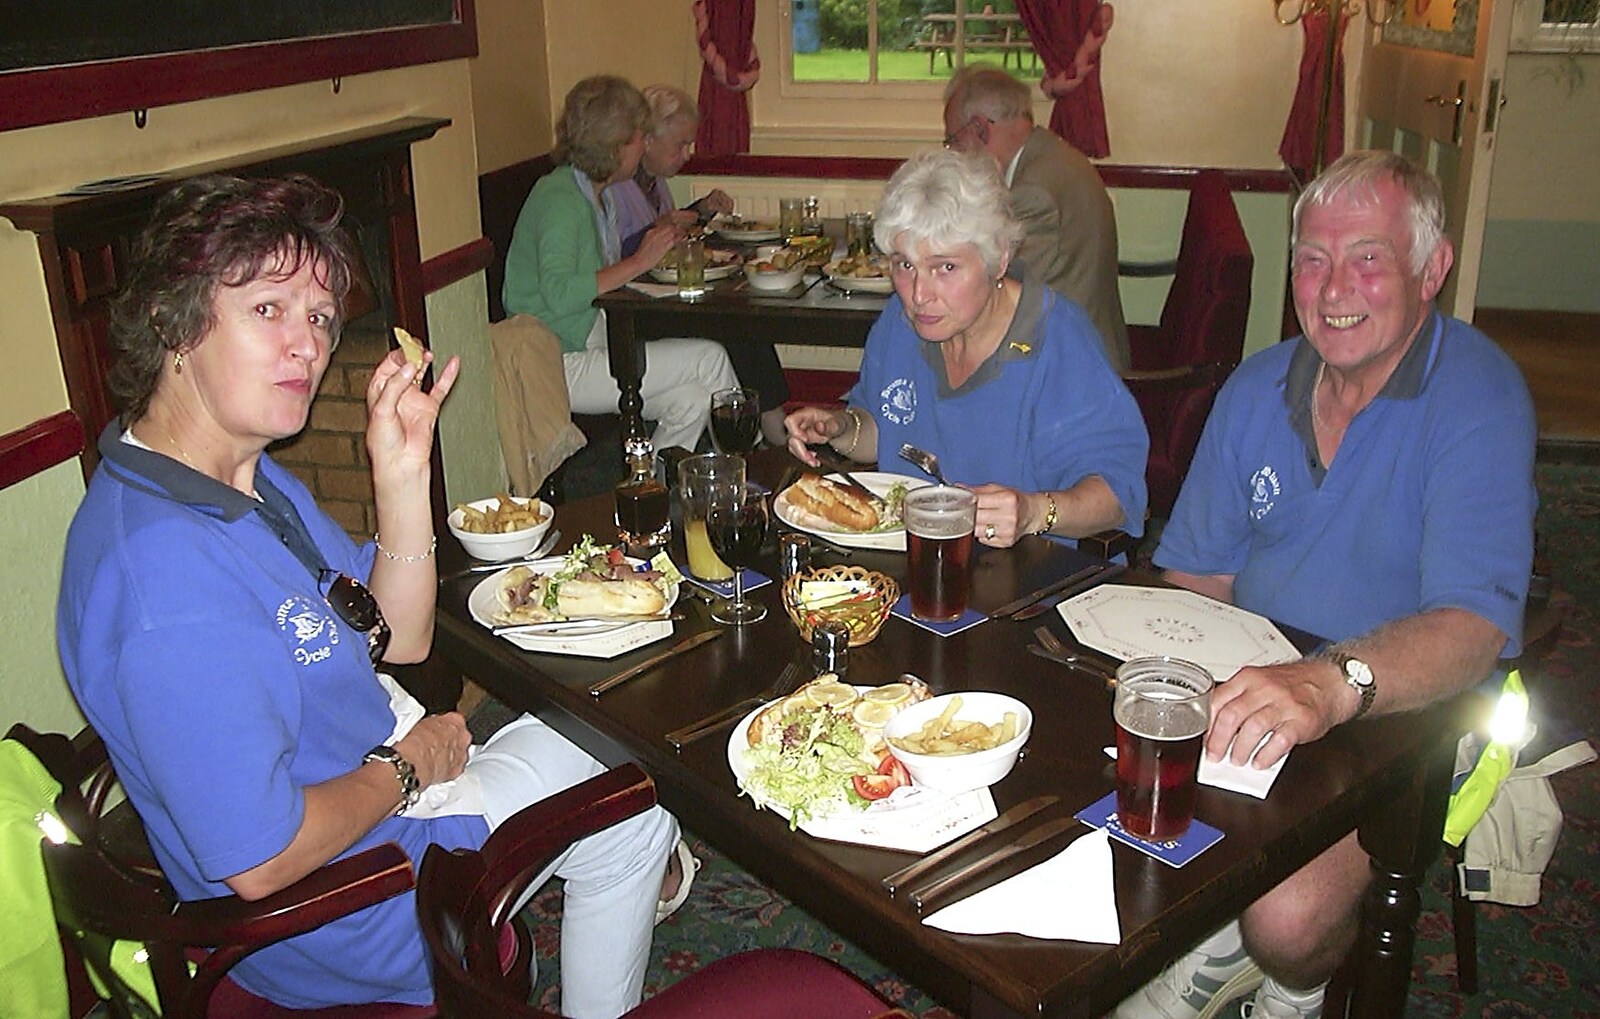 The BSCC Annual Sponsored Bike Ride, The Cottage, Thorpe St. Andrew, Norwich  - 18th July 2004: Jill and the Saga table